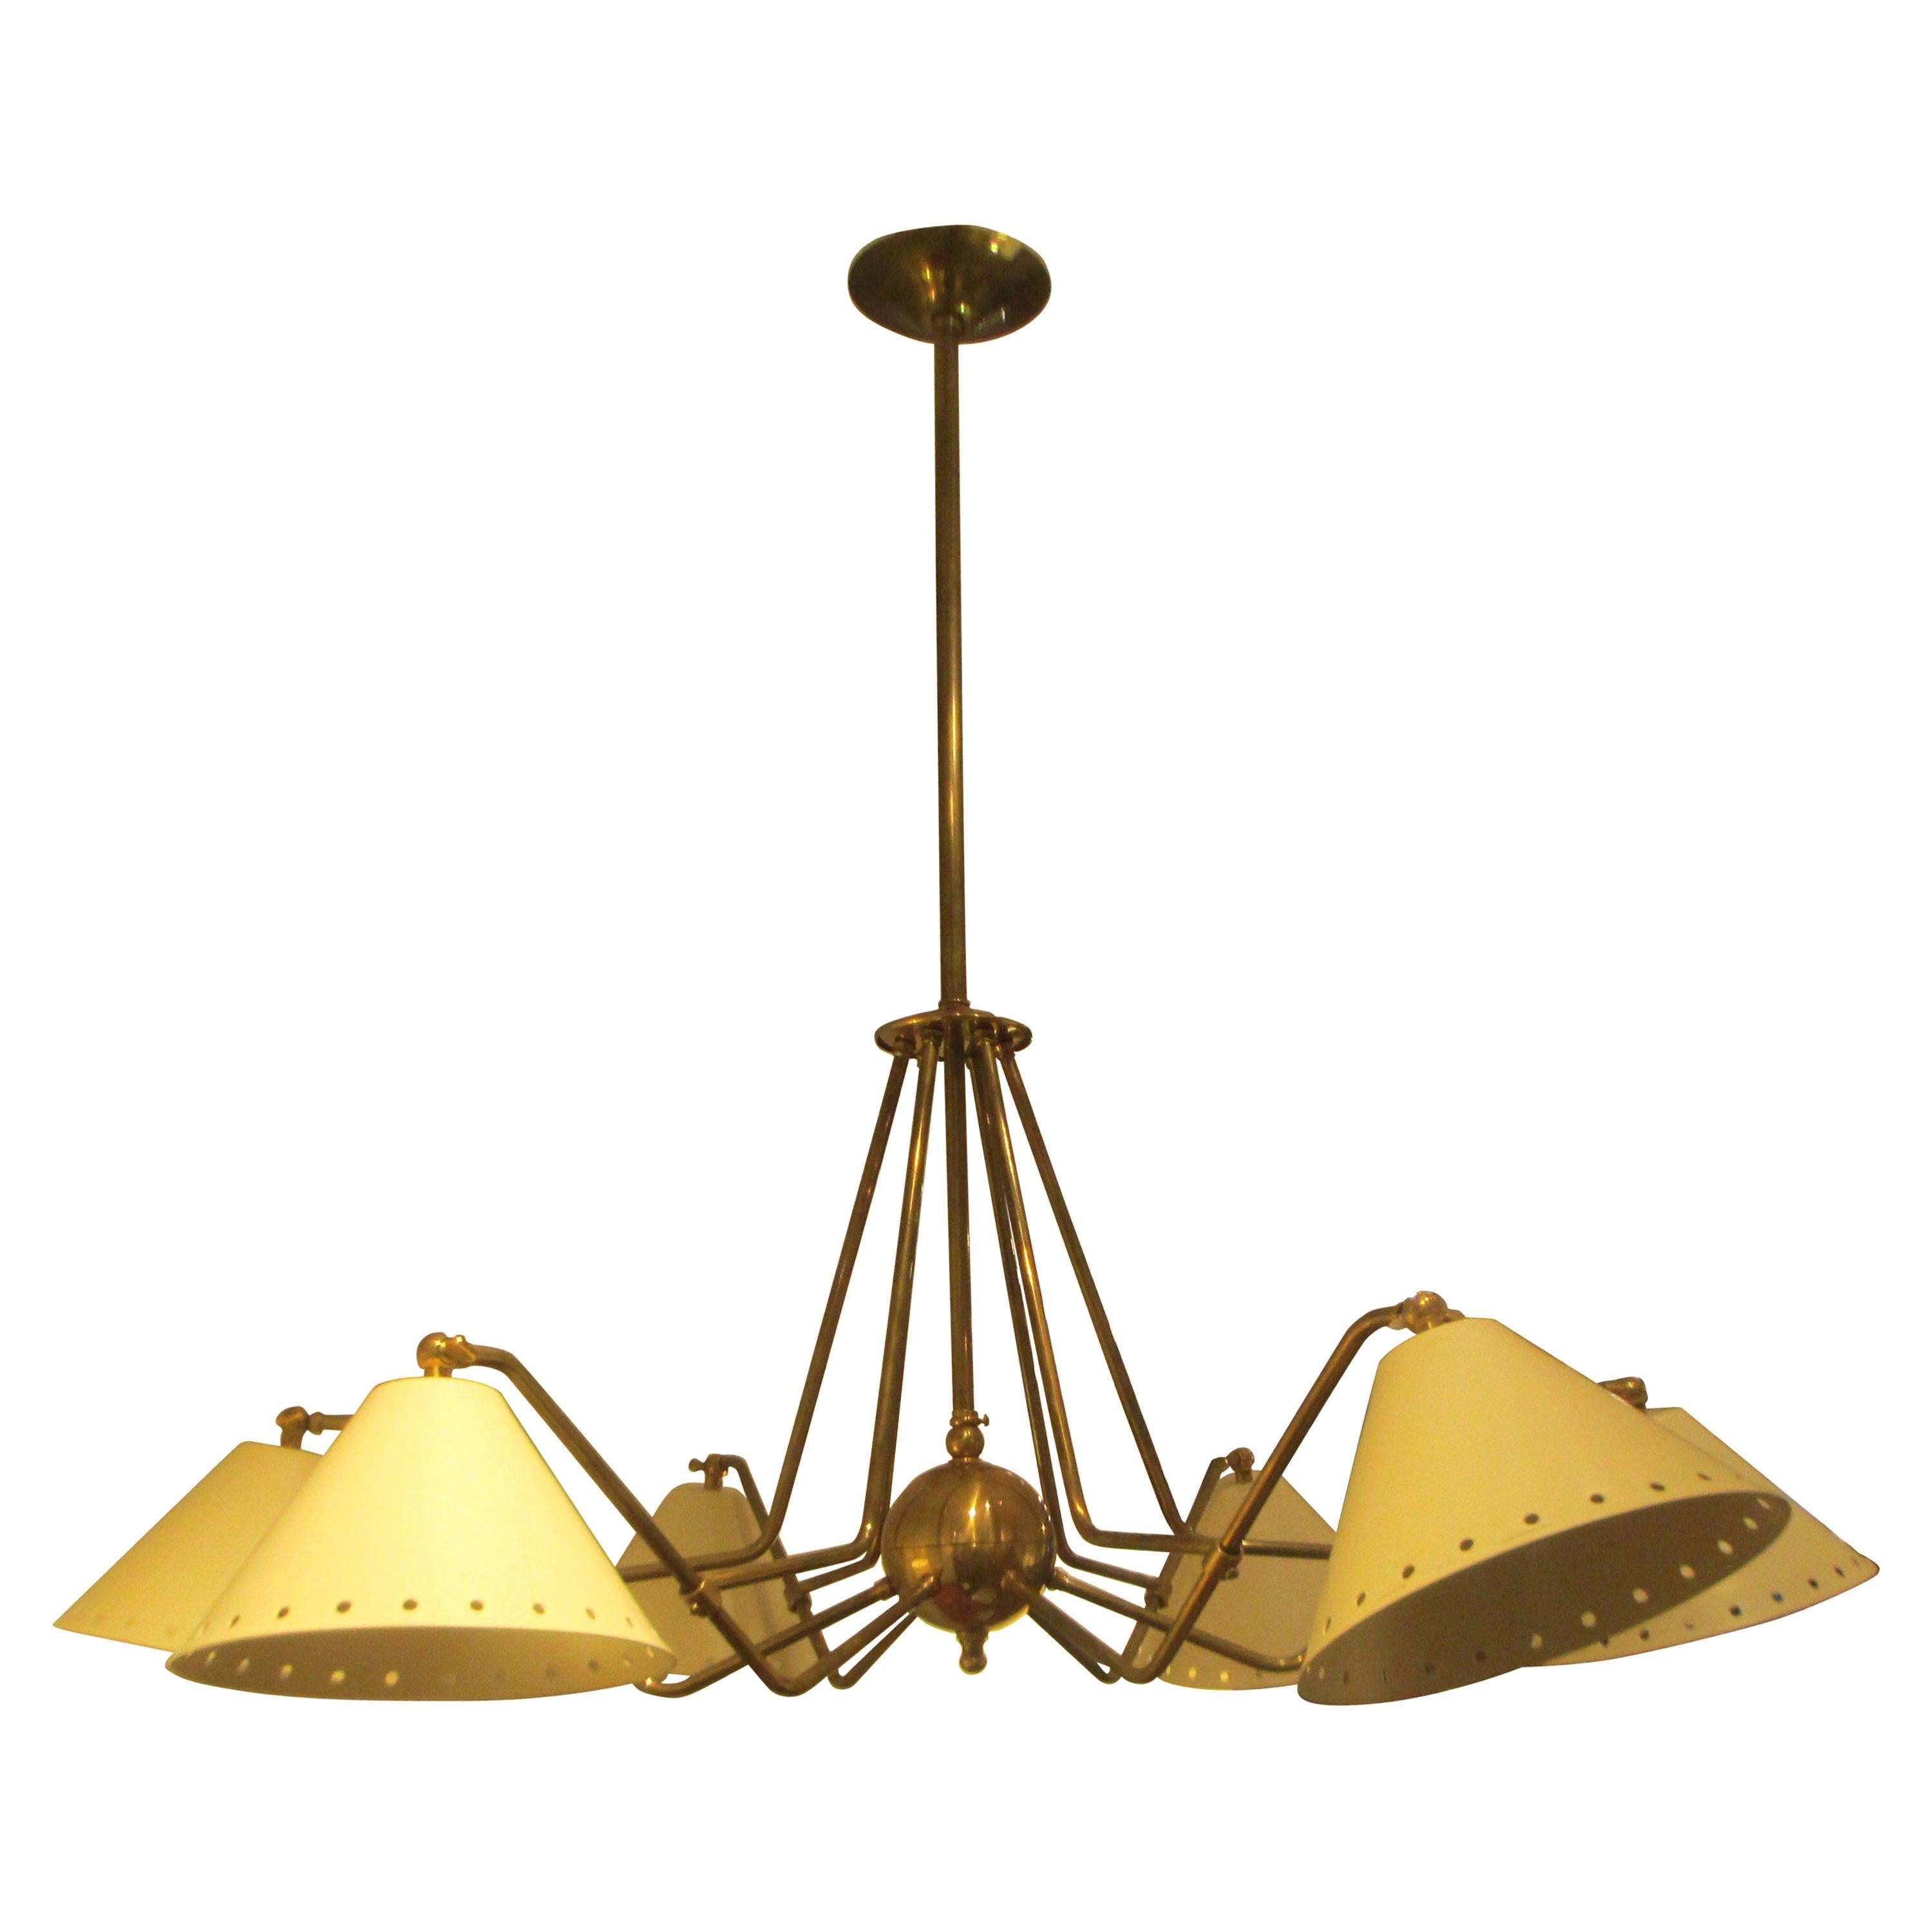 Custom Six-Light Brass and Tole Fixture in the Midcentury Manner